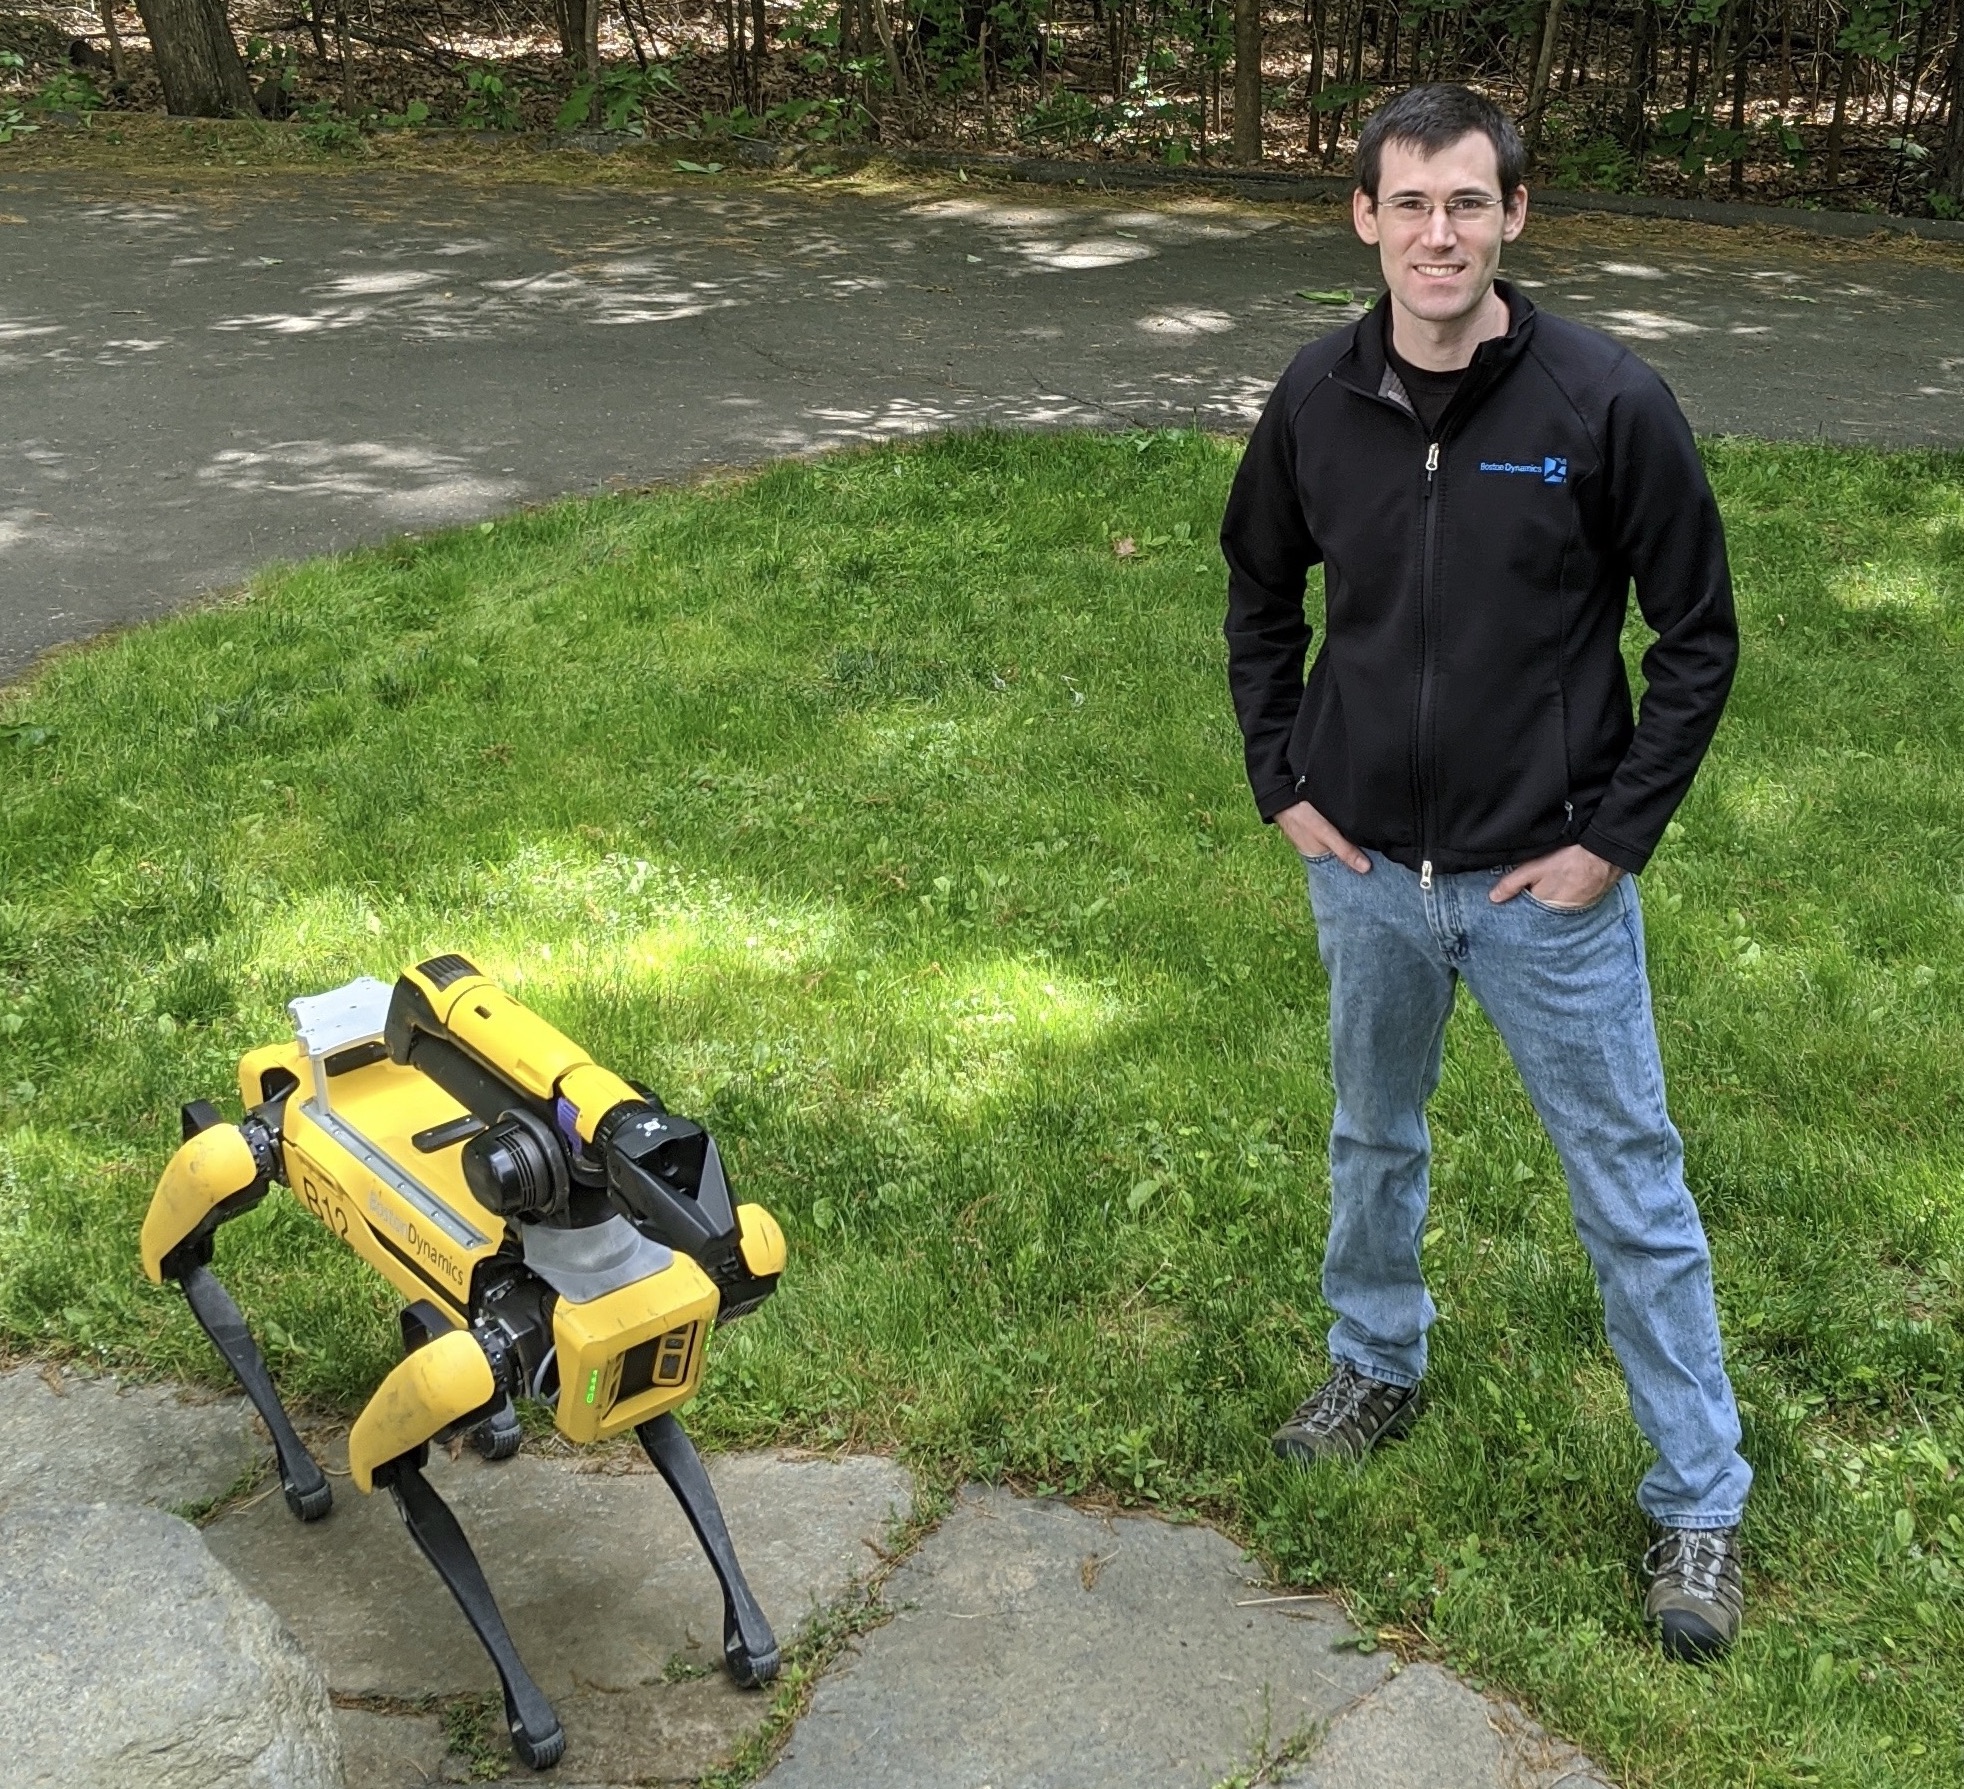 Andy Barry '10 stands next to Boston Dynamics' quadruped robot, Spot.